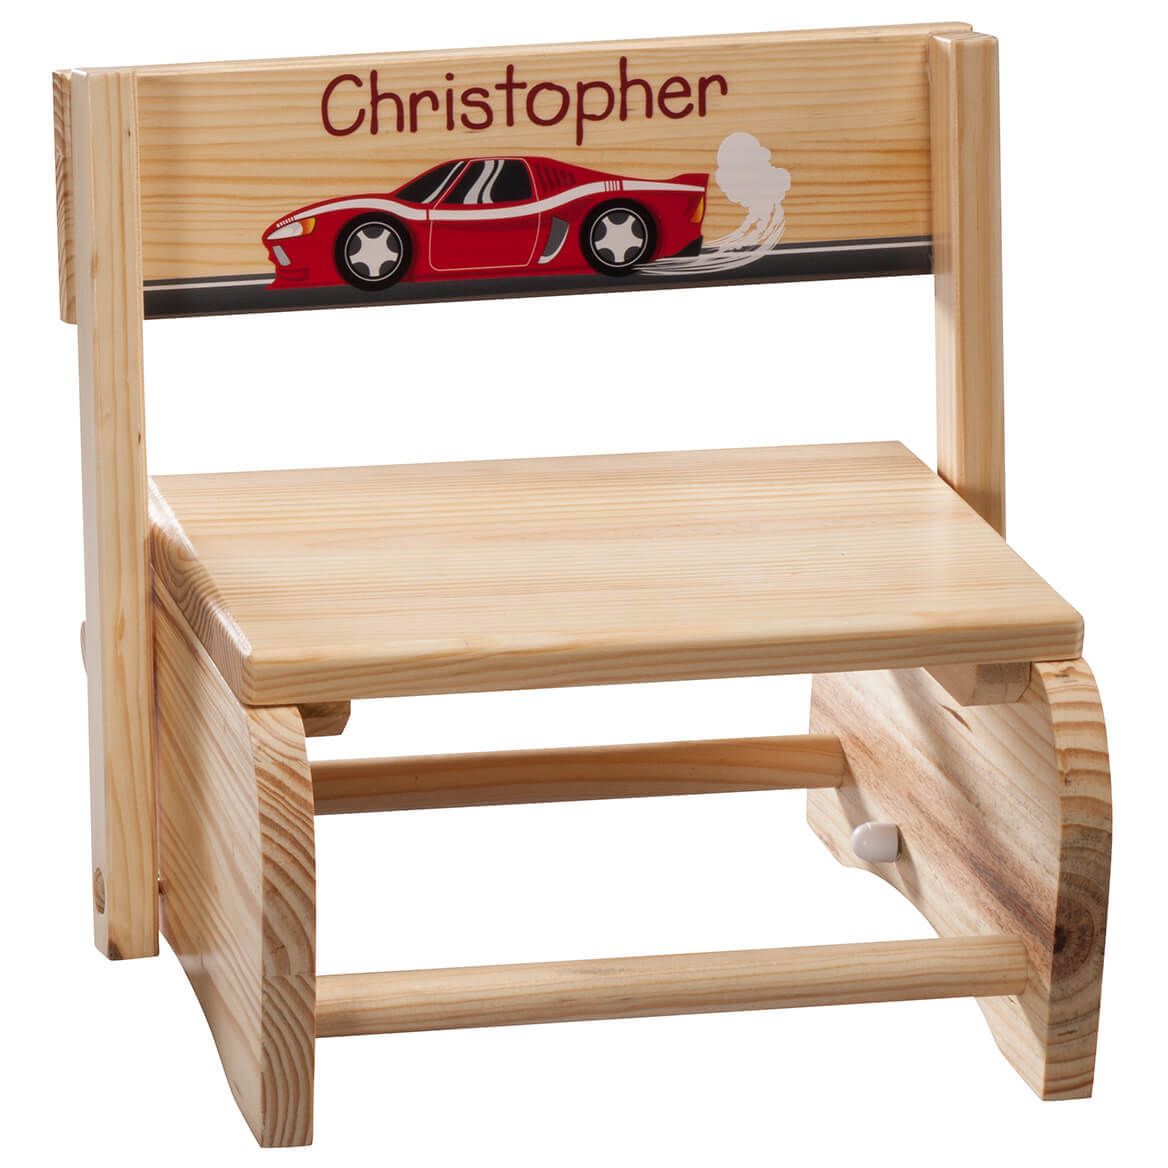 Personalized Children's Racecar Step Stool + '-' + 365669